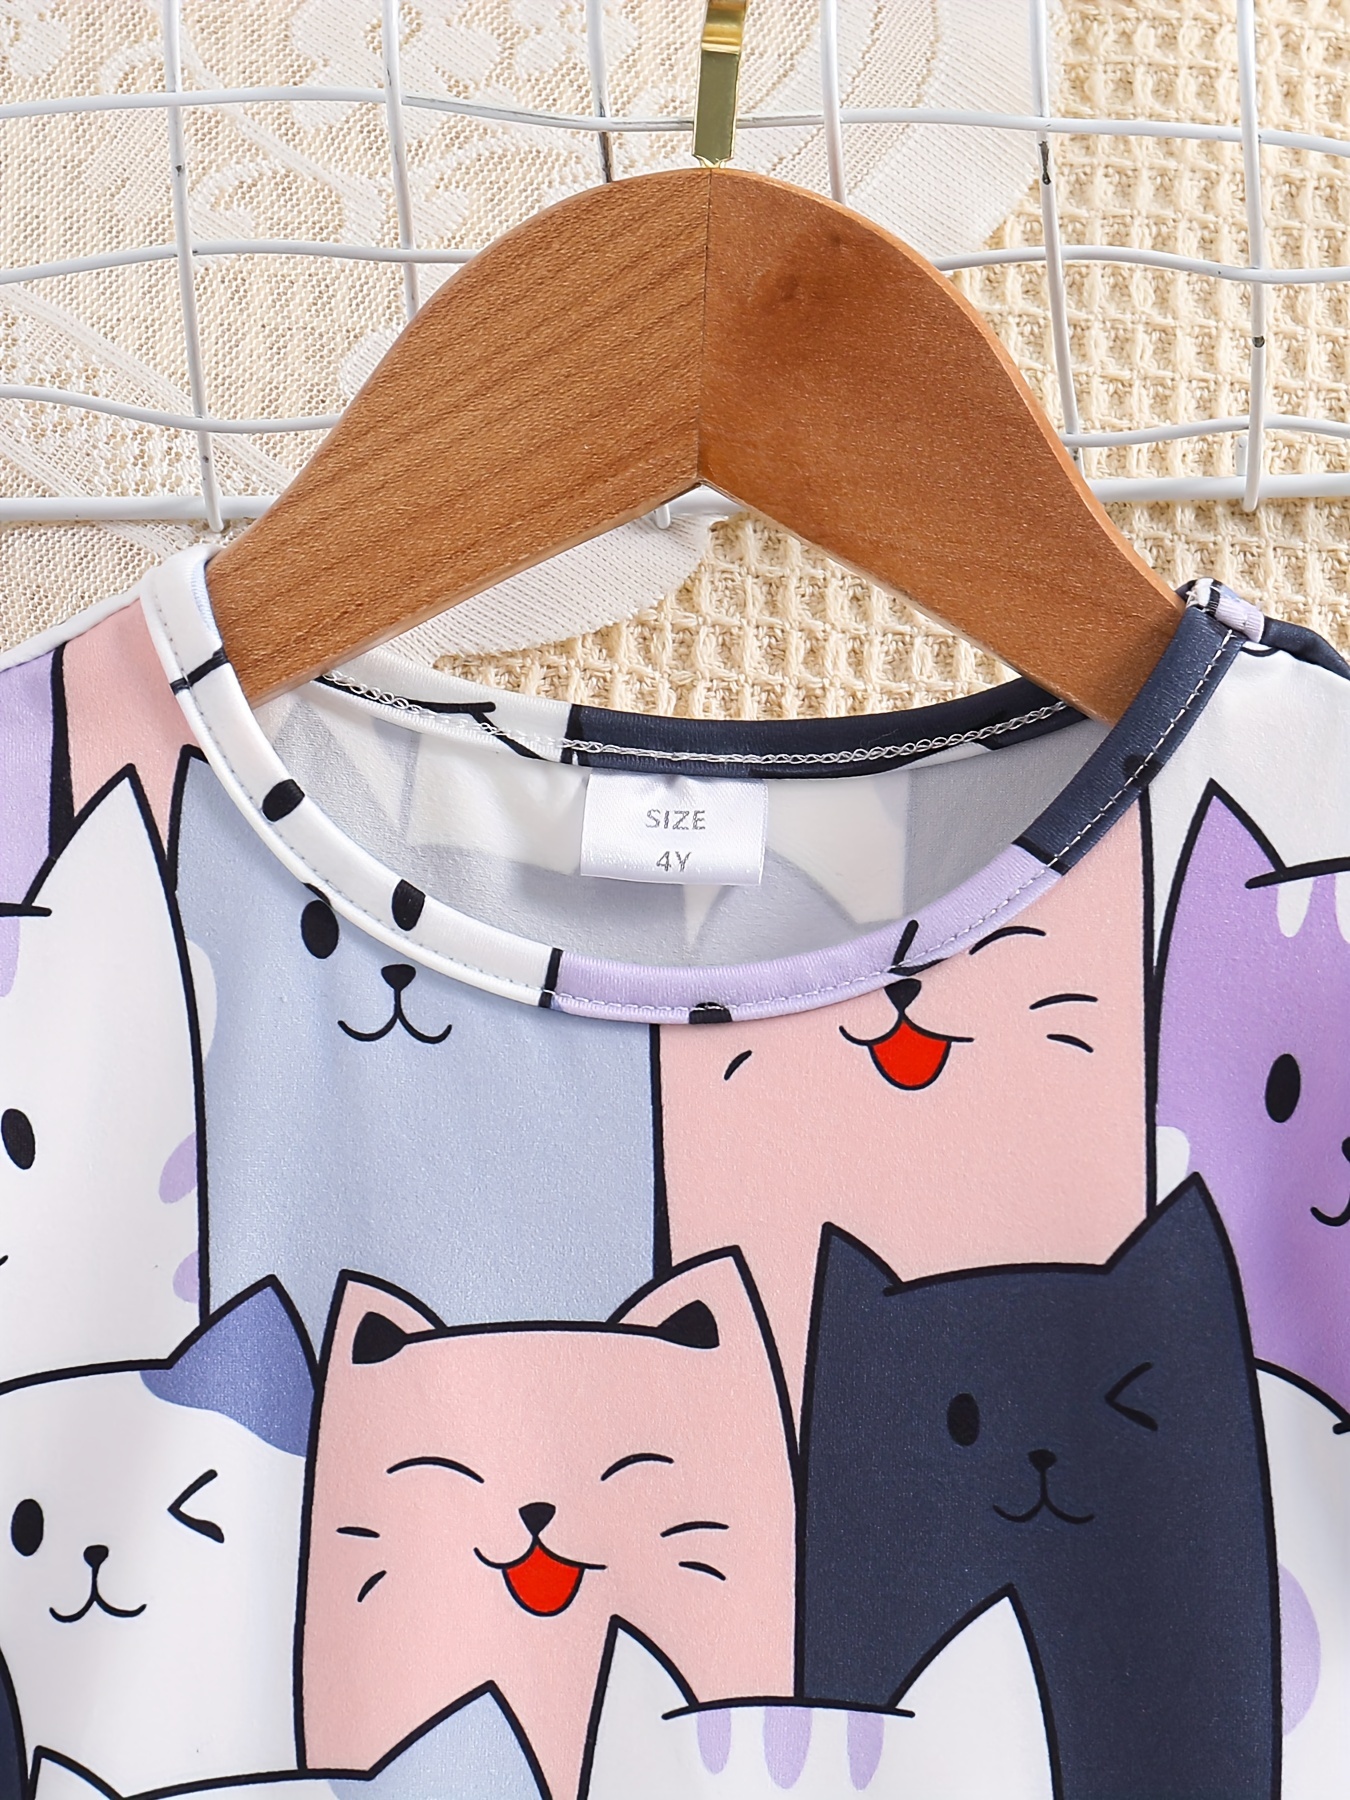 Cute Cats Allover Print Girls Short Sleeve T-shirt Dress For Leisure Or  Outfit, Kids Clothing - Temu